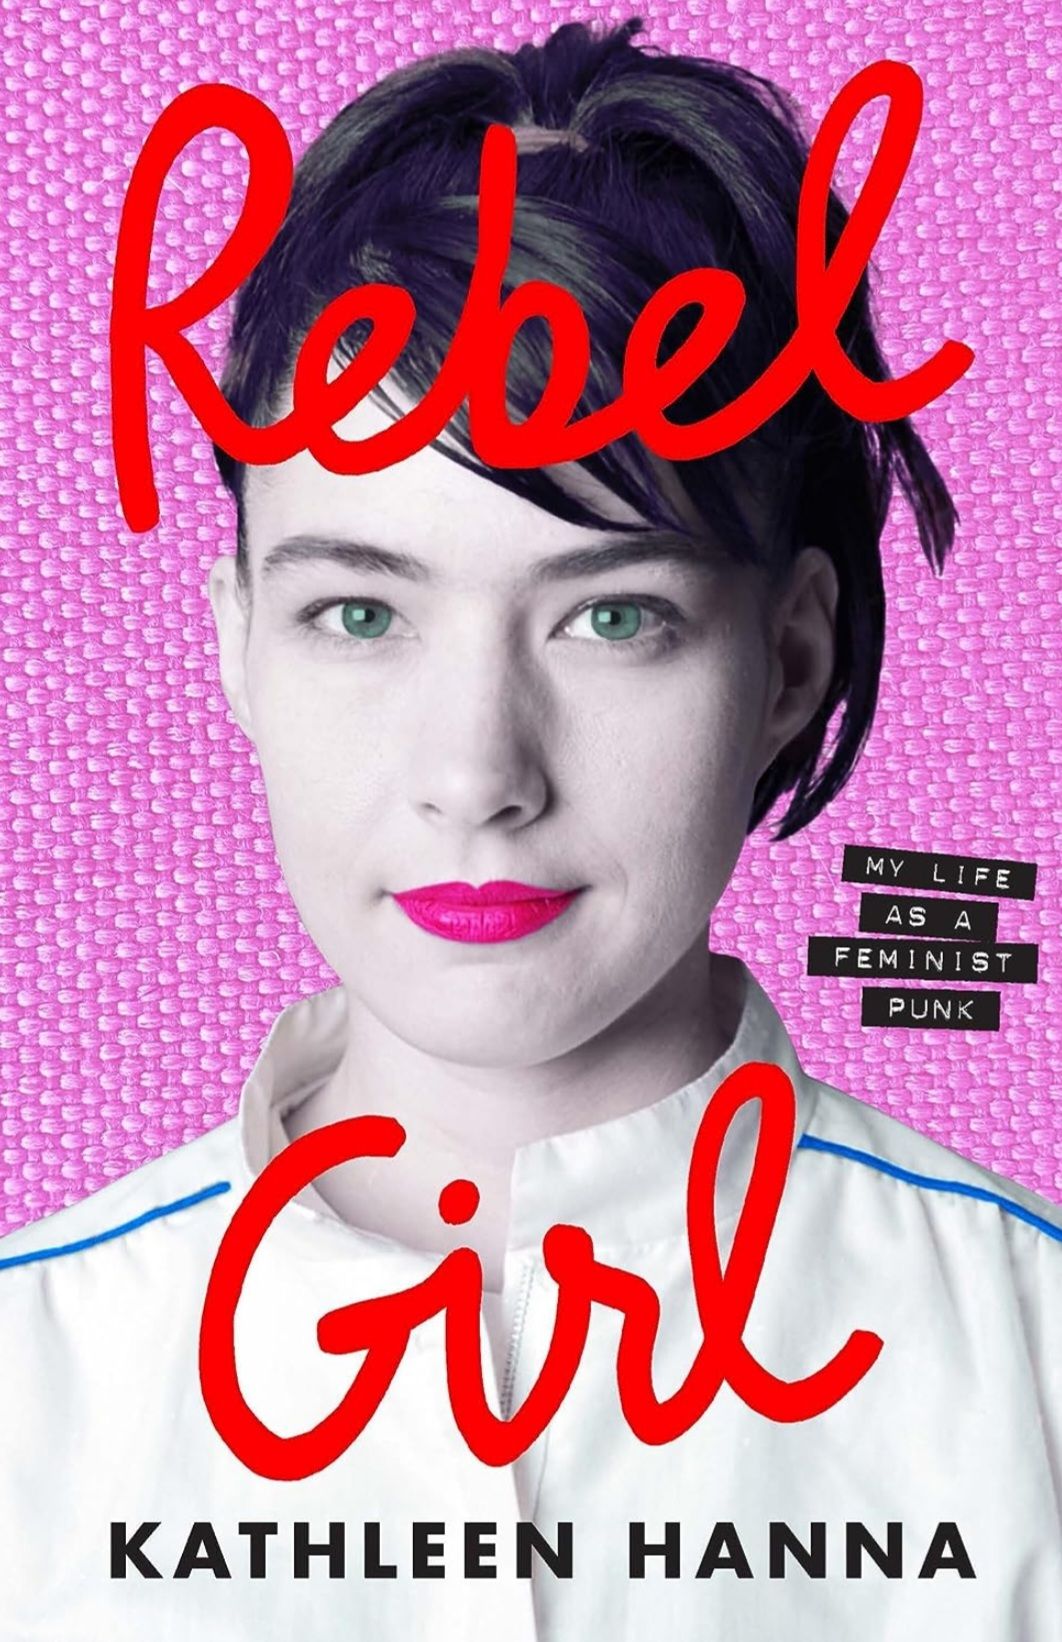 Download Rebel Girl: My Life as a Feminist Punk PDF by Kathleen Hanna